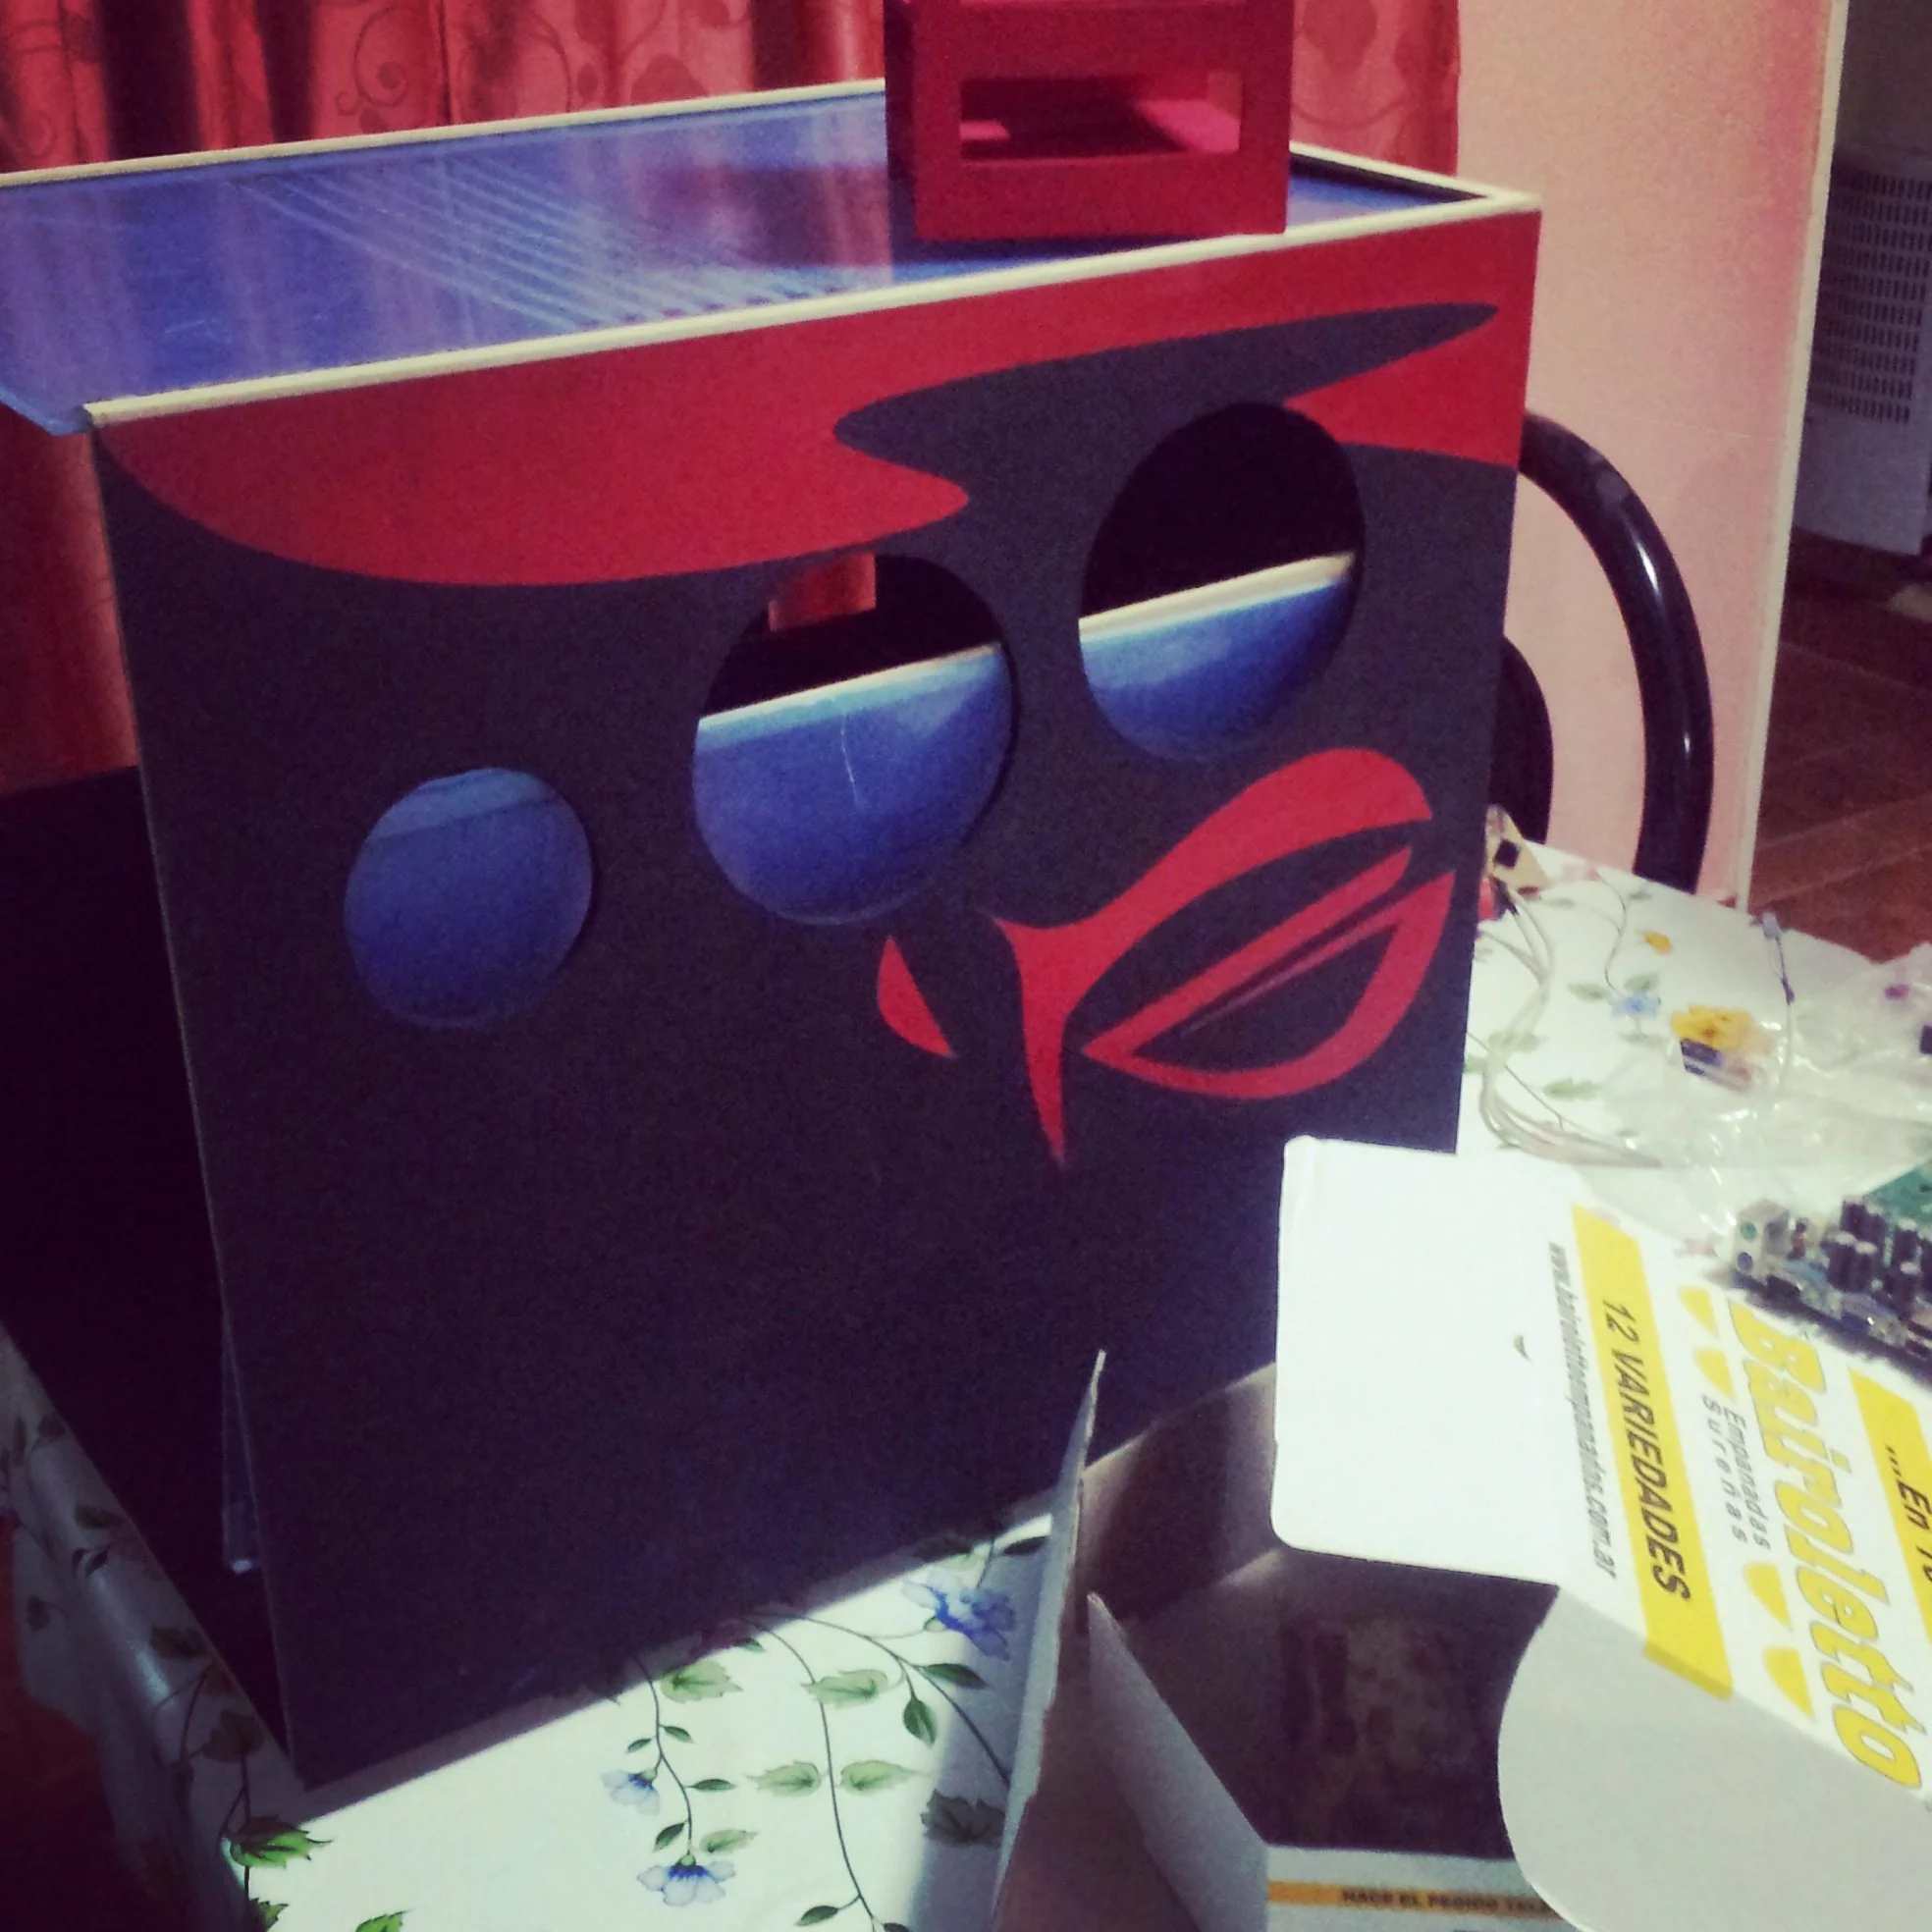 mdf cabinet painted black with red ornaments, acrylics and republic of gamers logo